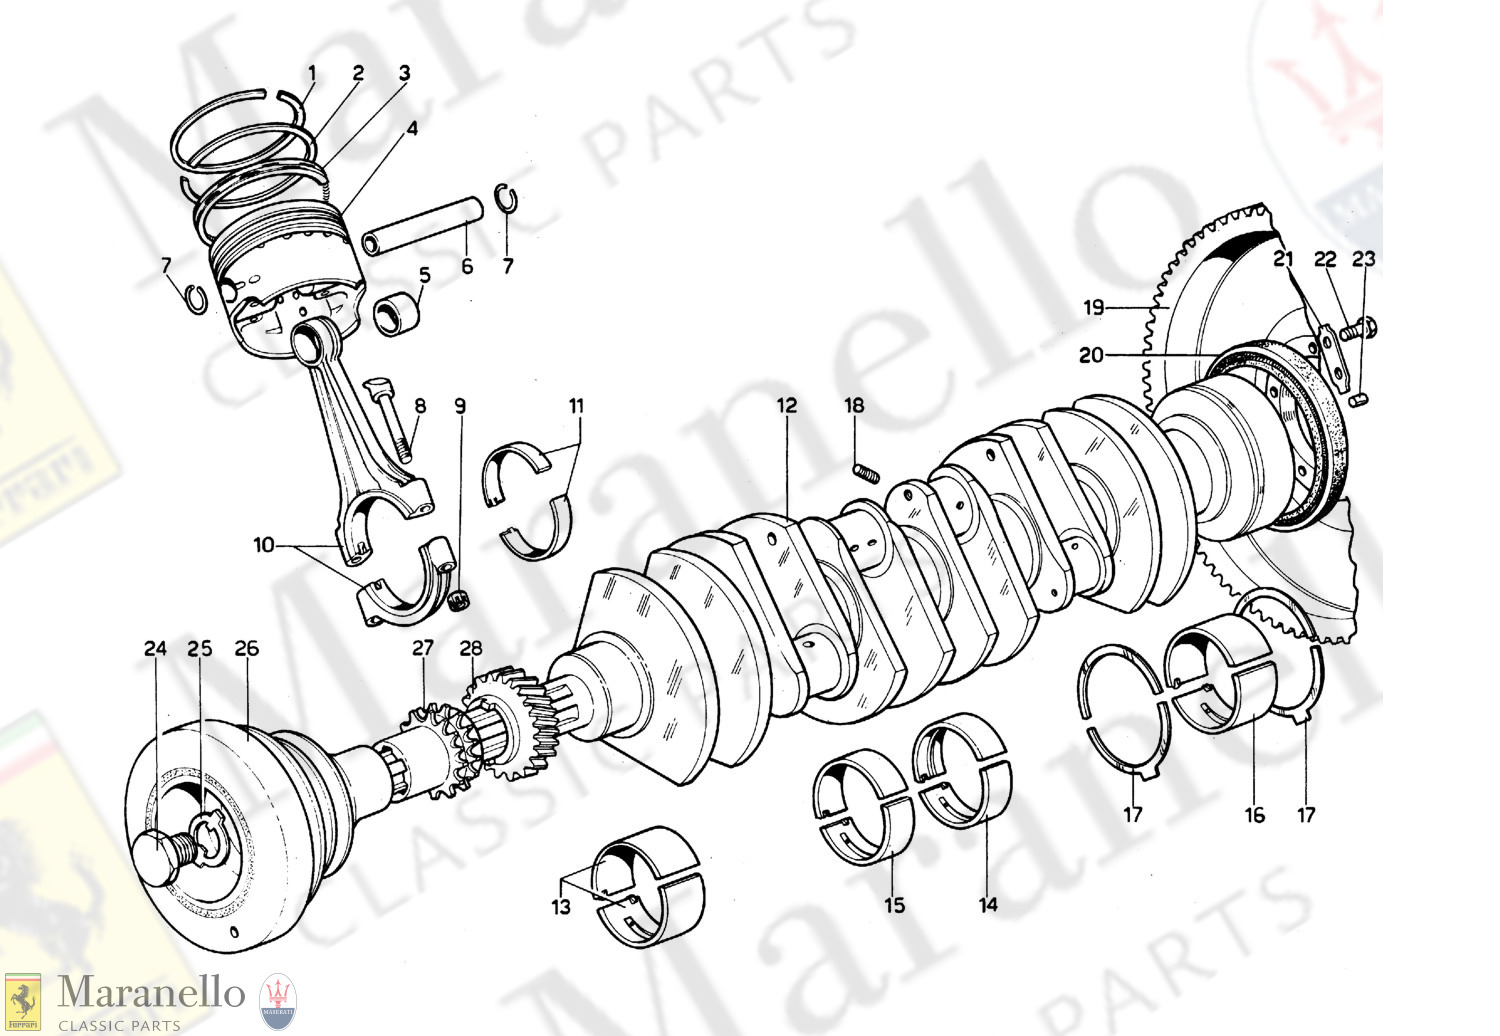 003 - Crankshaft, Connecting Rods And Pistons